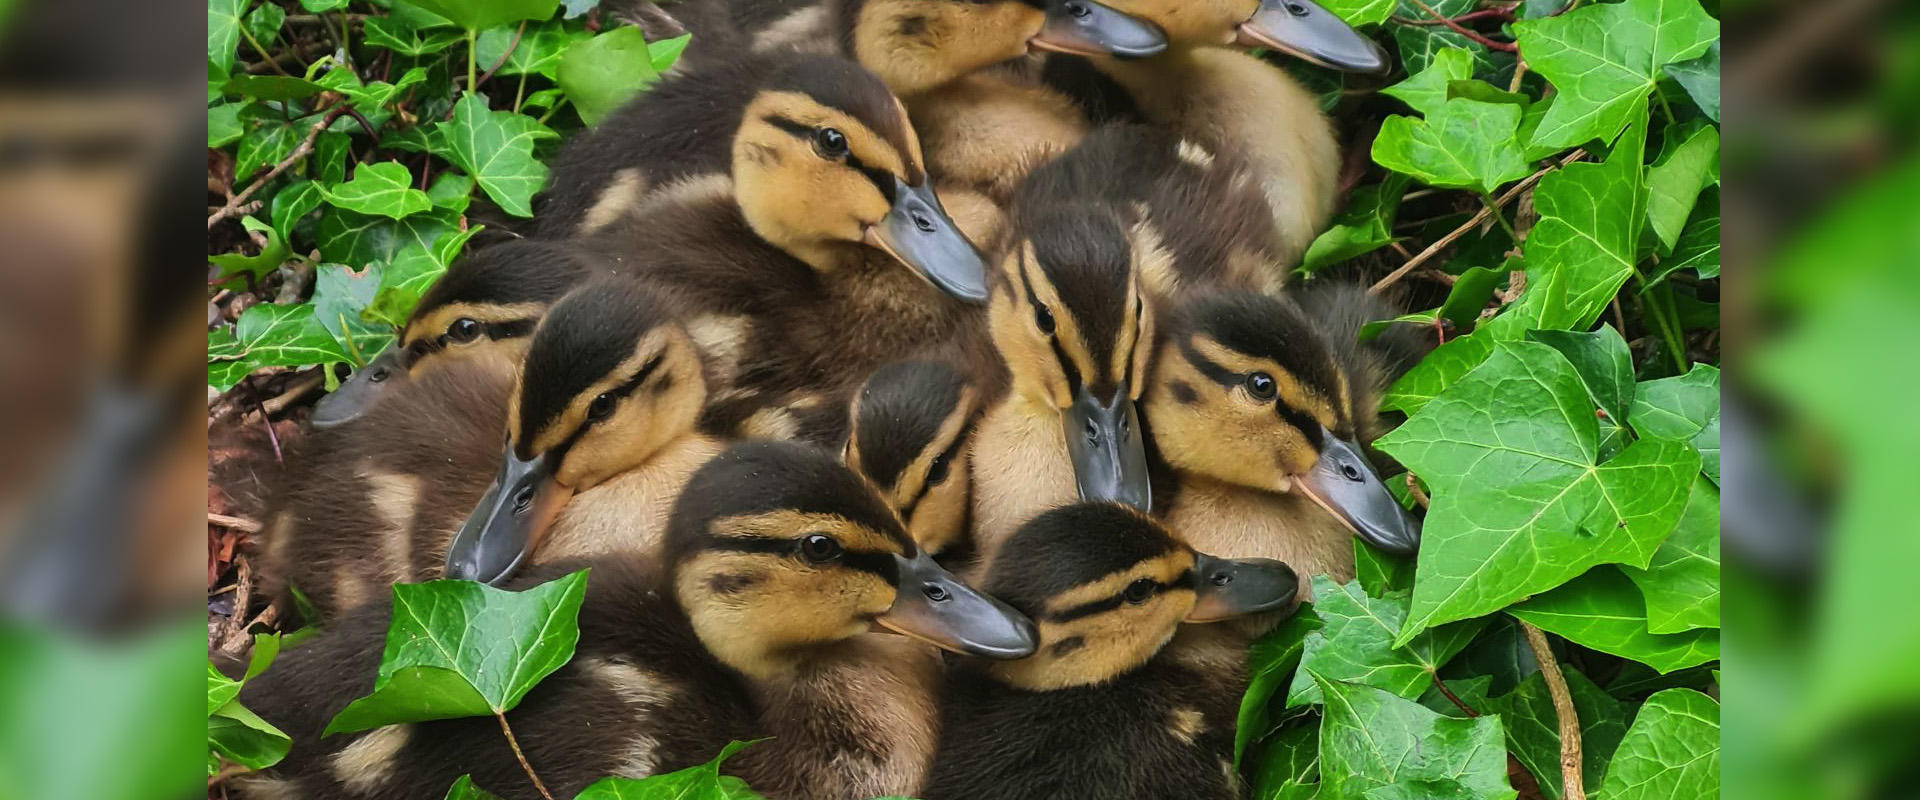 new ducklings grouped together in grass